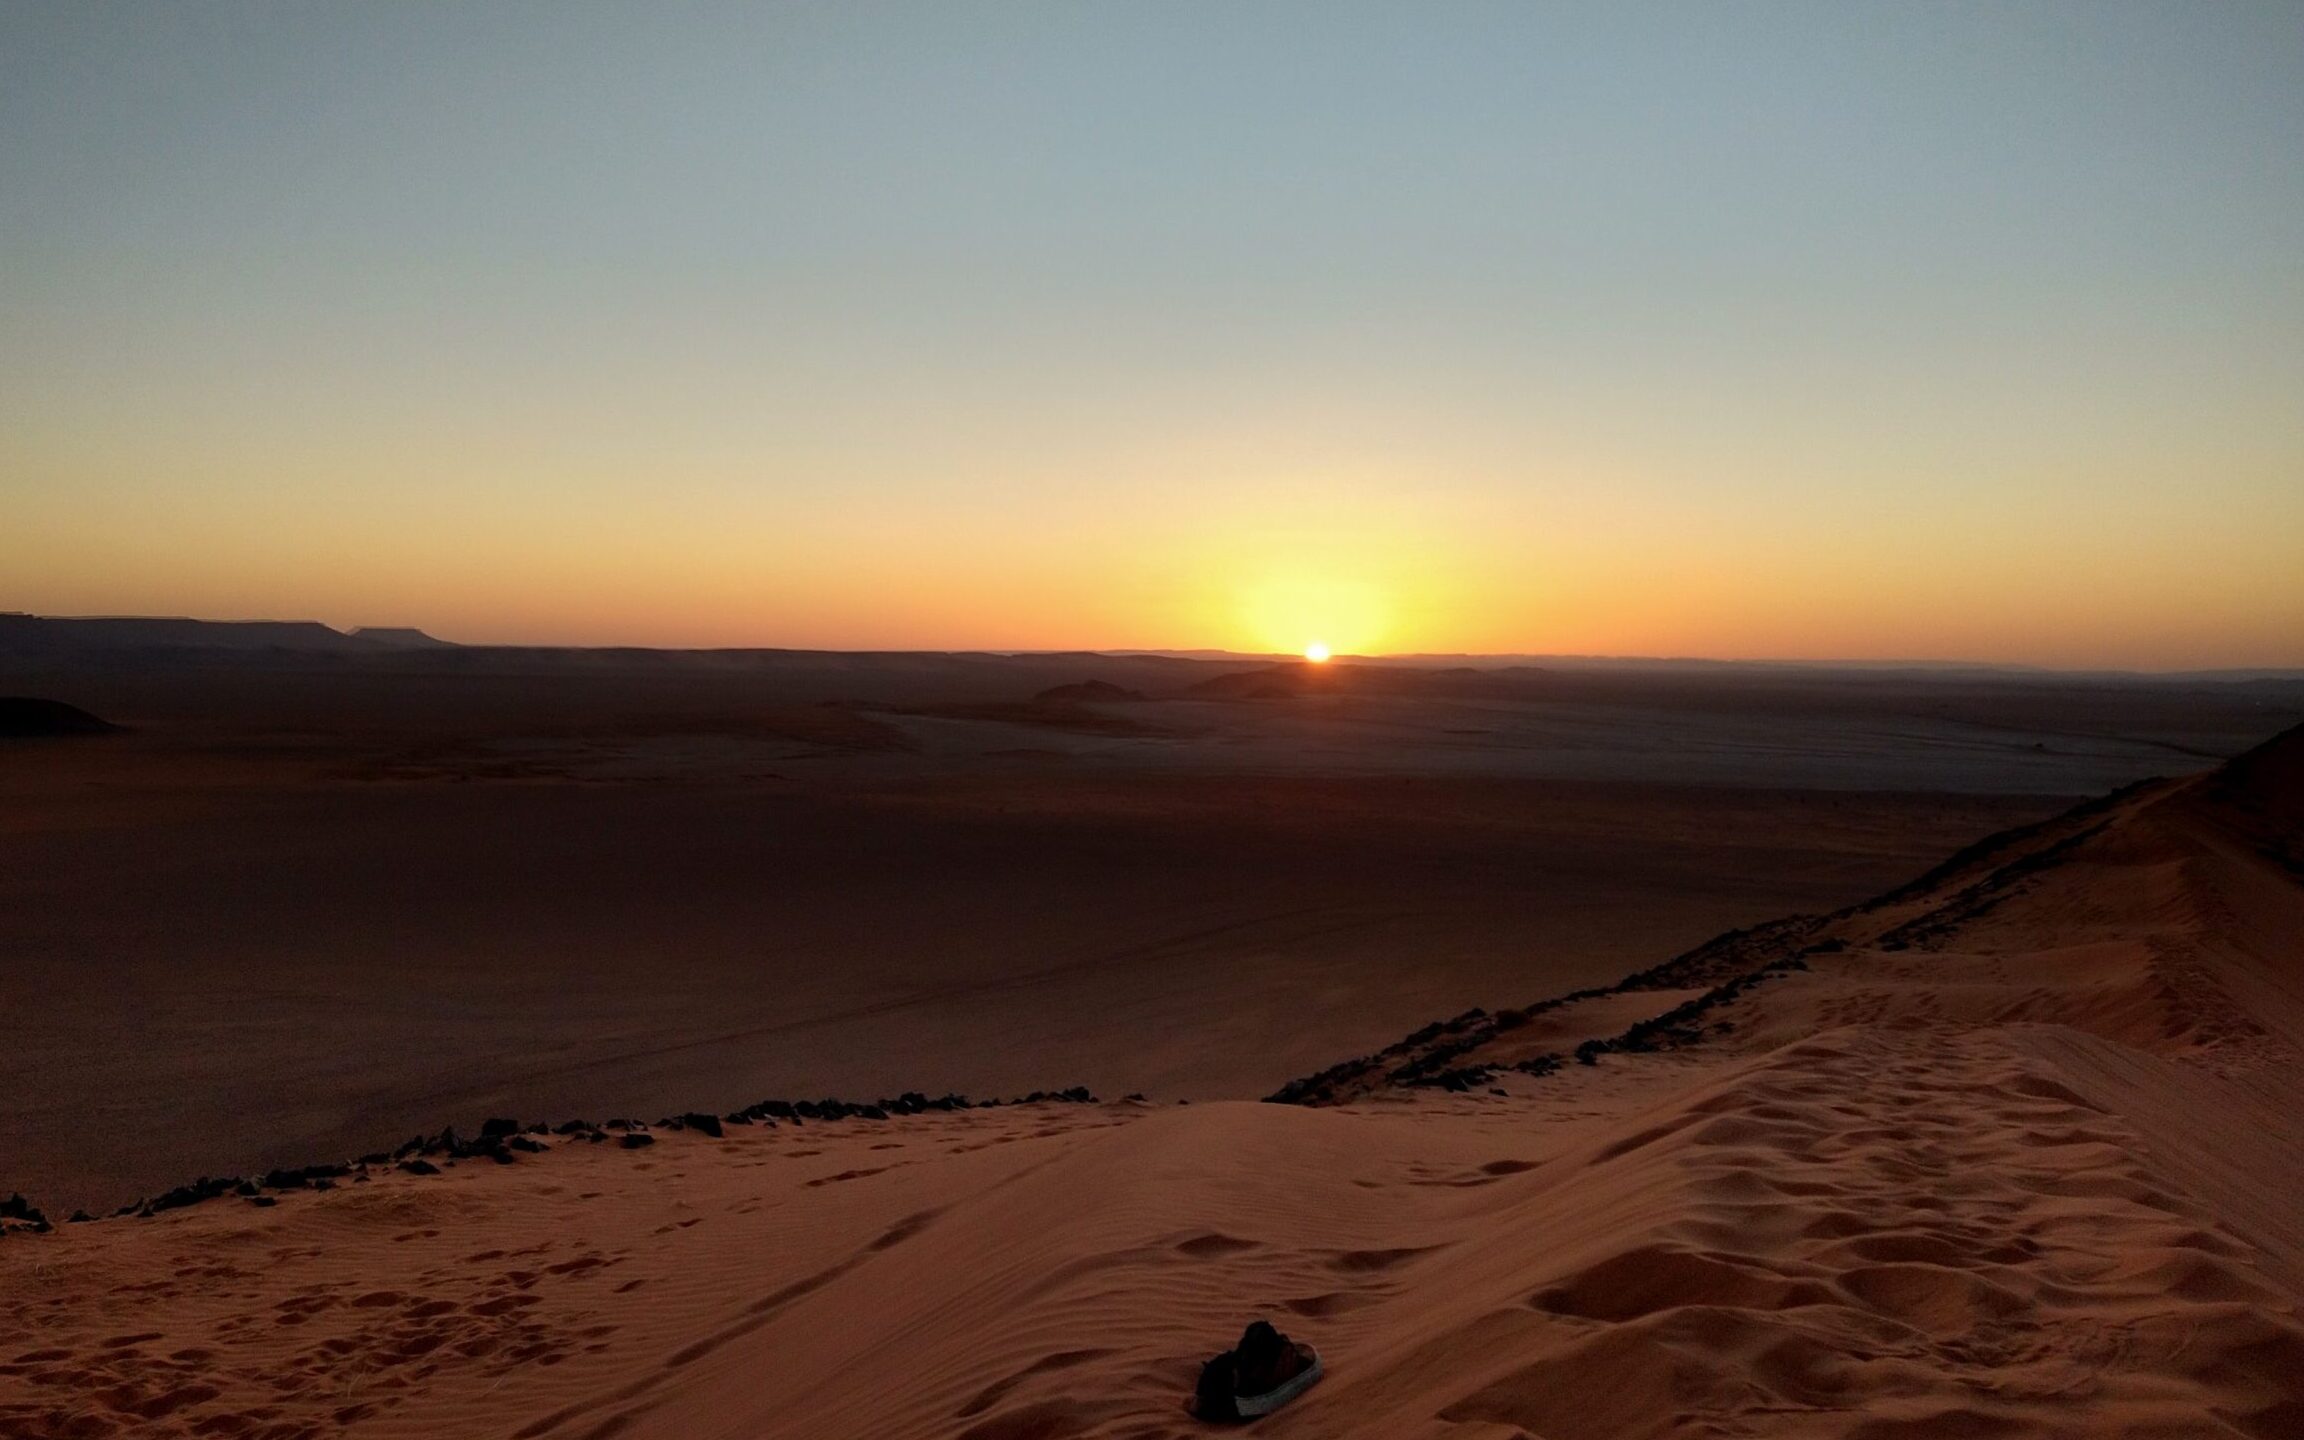 up on the sand dune looking across the plain into the sunset